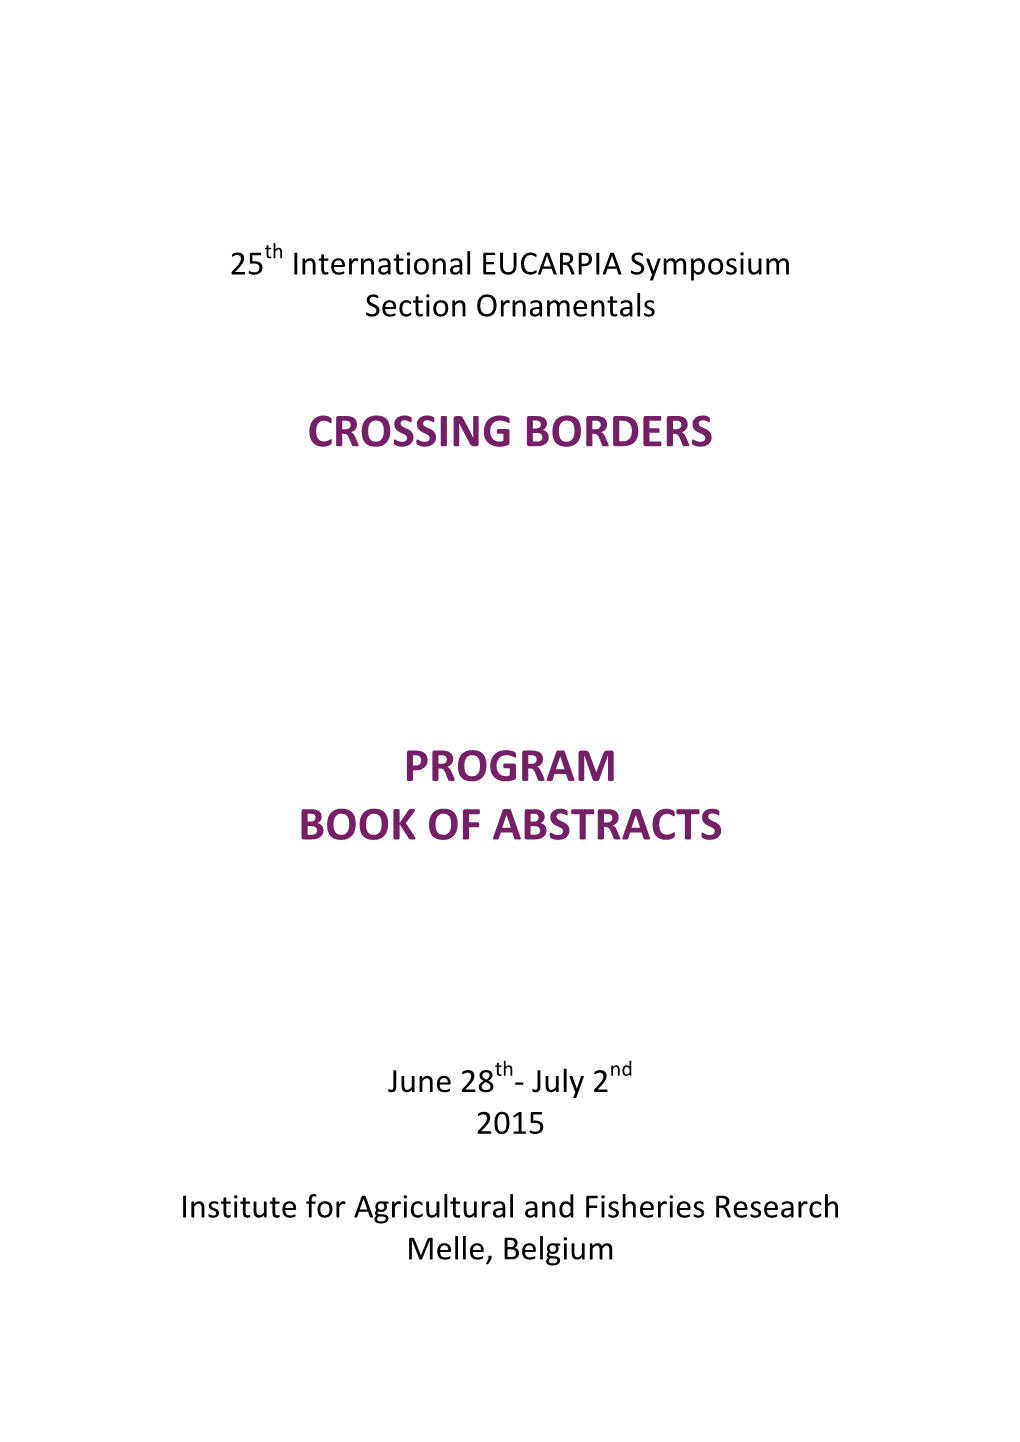 Crossing Borders Program Book of Abstracts